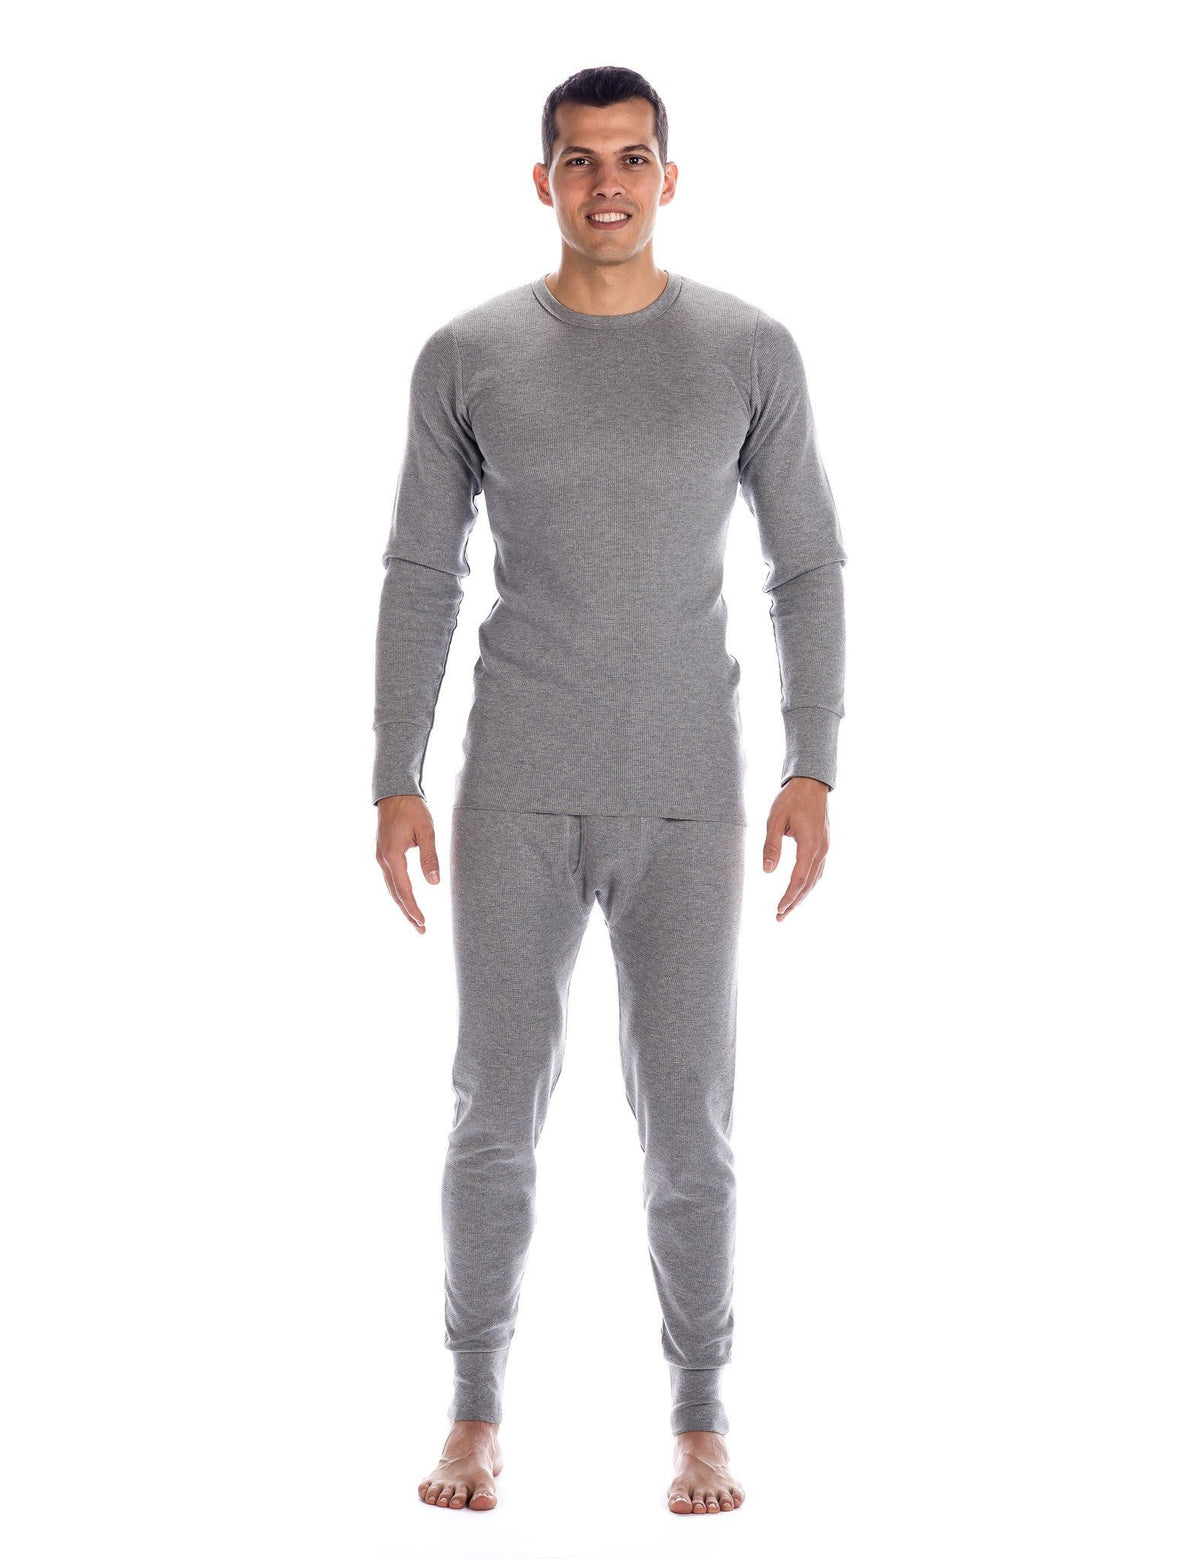 Men's Extreme Cold Waffle Knit Thermal Top and Bottom Set - Heather Gray